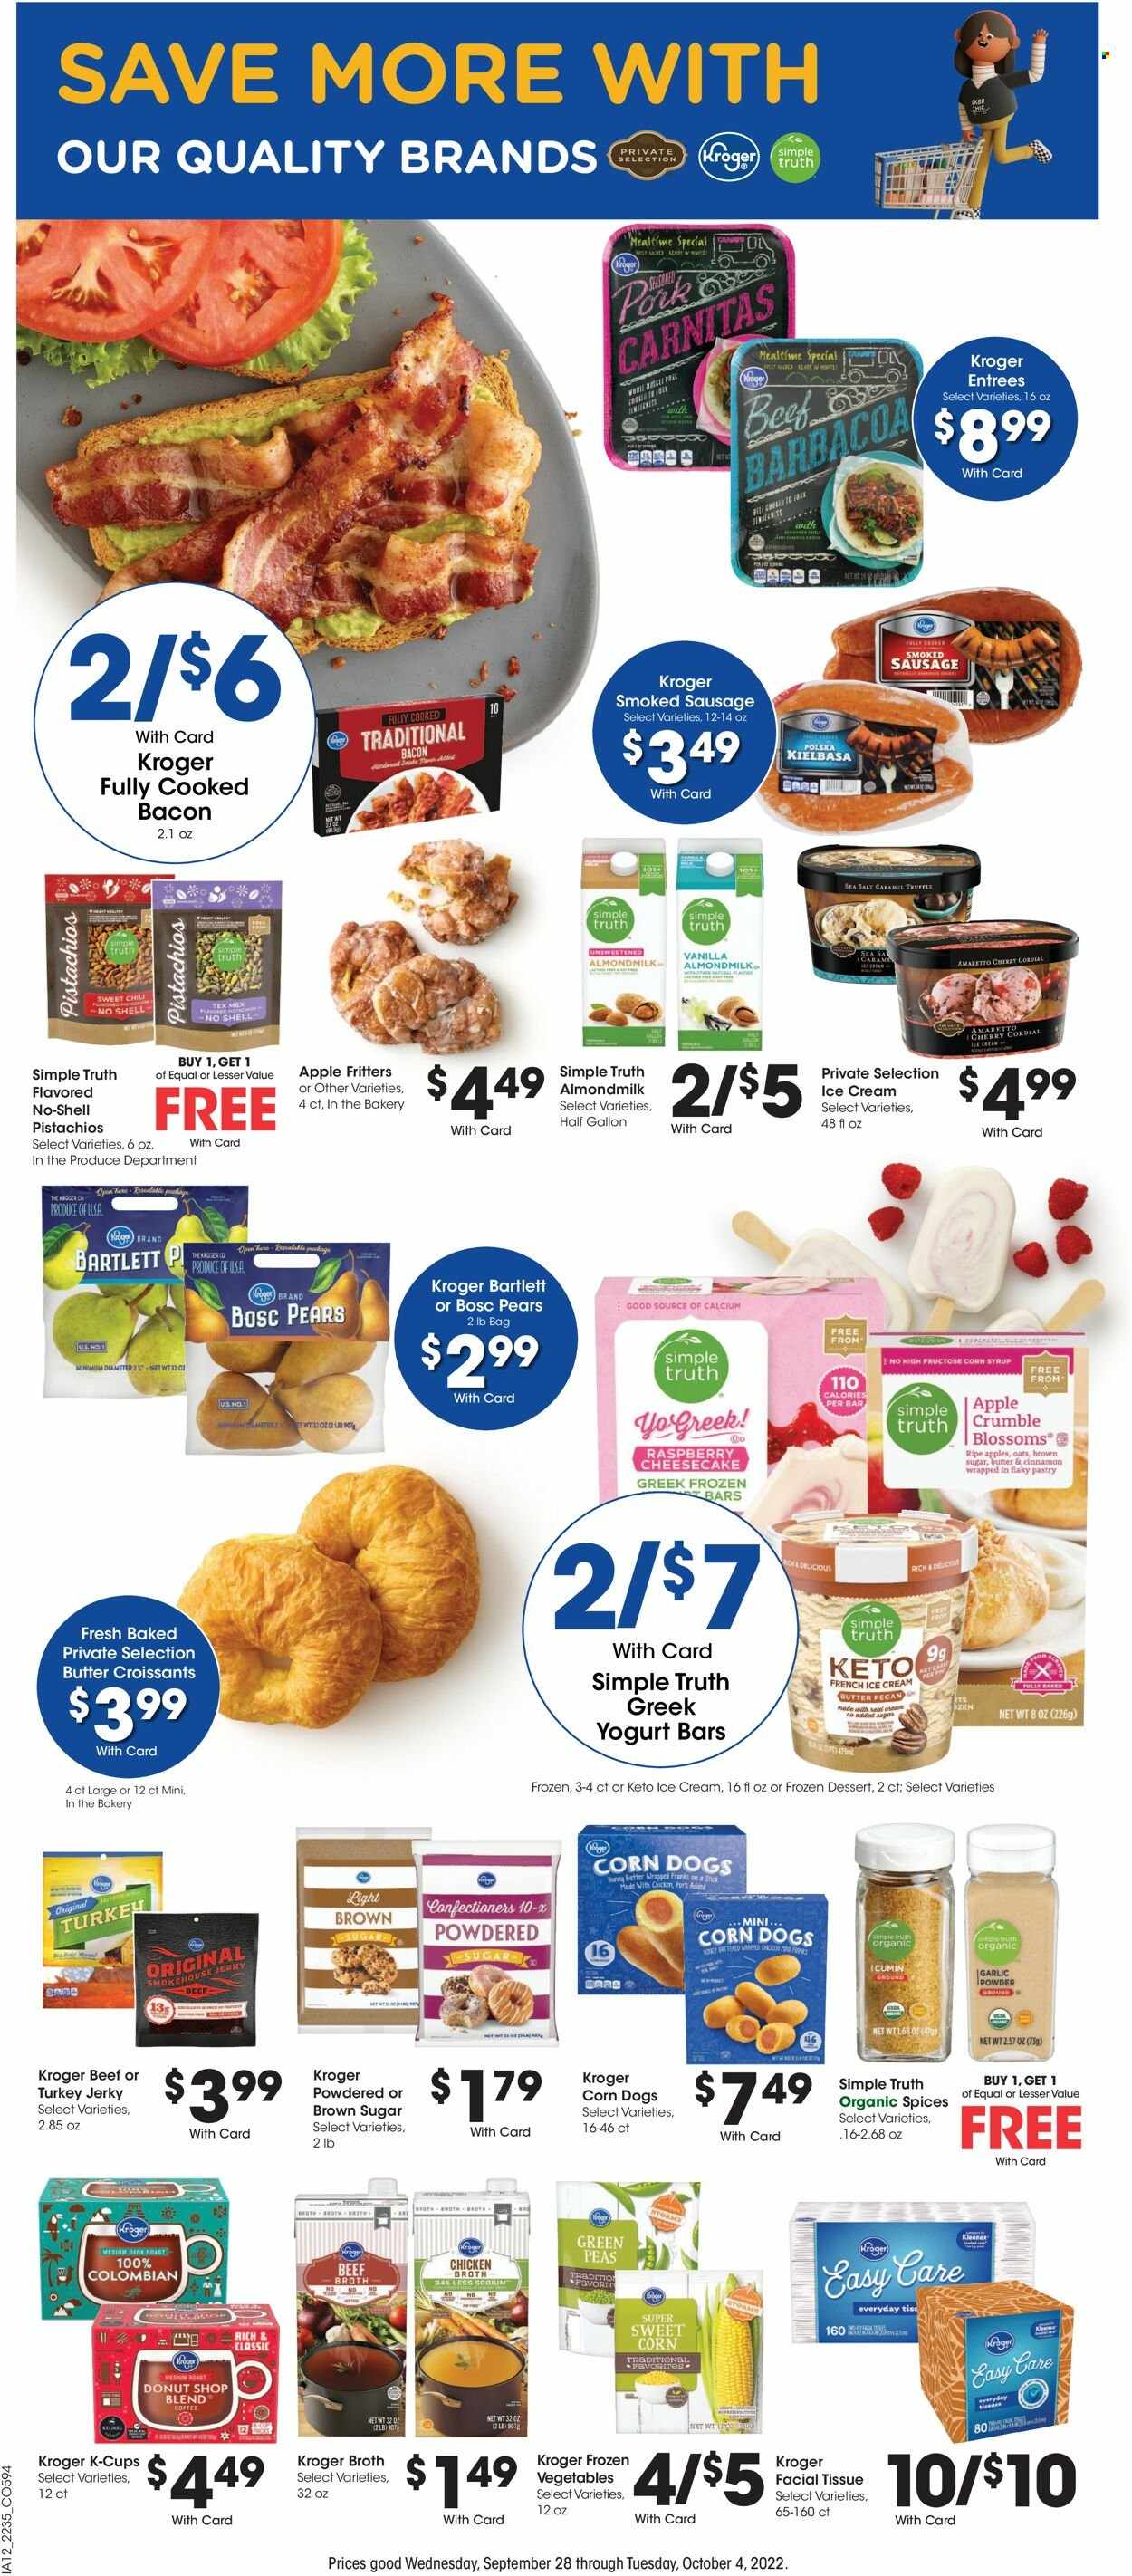 thumbnail - Kroger Flyer - 09/28/2022 - 10/04/2022 - Sales products - croissant, peas, sweet corn, Bartlett pears, pears, ready meal, bacon, jerky, sausage, smoked sausage, kielbasa, greek yoghurt, almond milk, ice cream, Enlightened lce Cream, frozen dessert, frozen vegetables, truffles, beef broth, sugar, chicken broth, oats, icing sugar, broth, spice, garlic powder, corn syrup, syrup, coffee capsules, K-Cups, Amaretto, Kleenex, tissues, facial tissues, toys. Page 8.